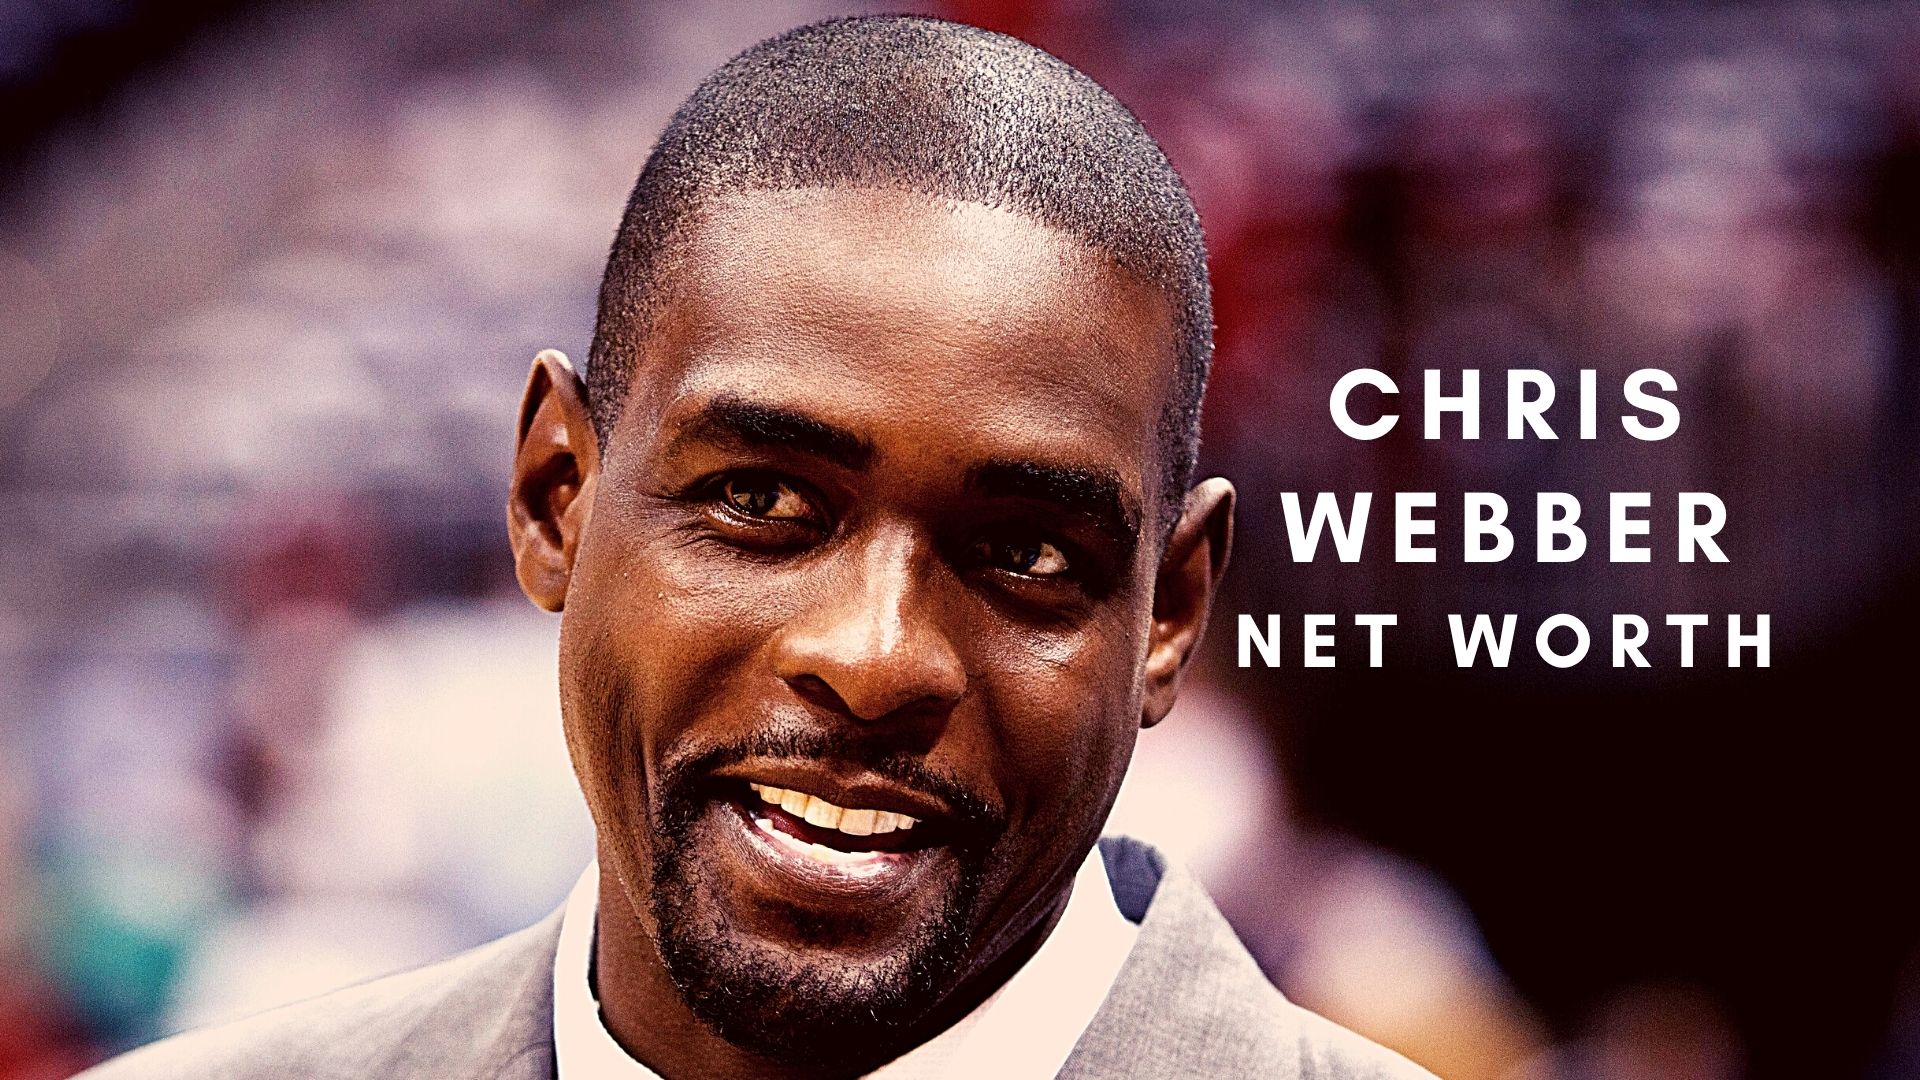 Chris Webber 2021 Net Worth, Salary, Records, and Endorsements